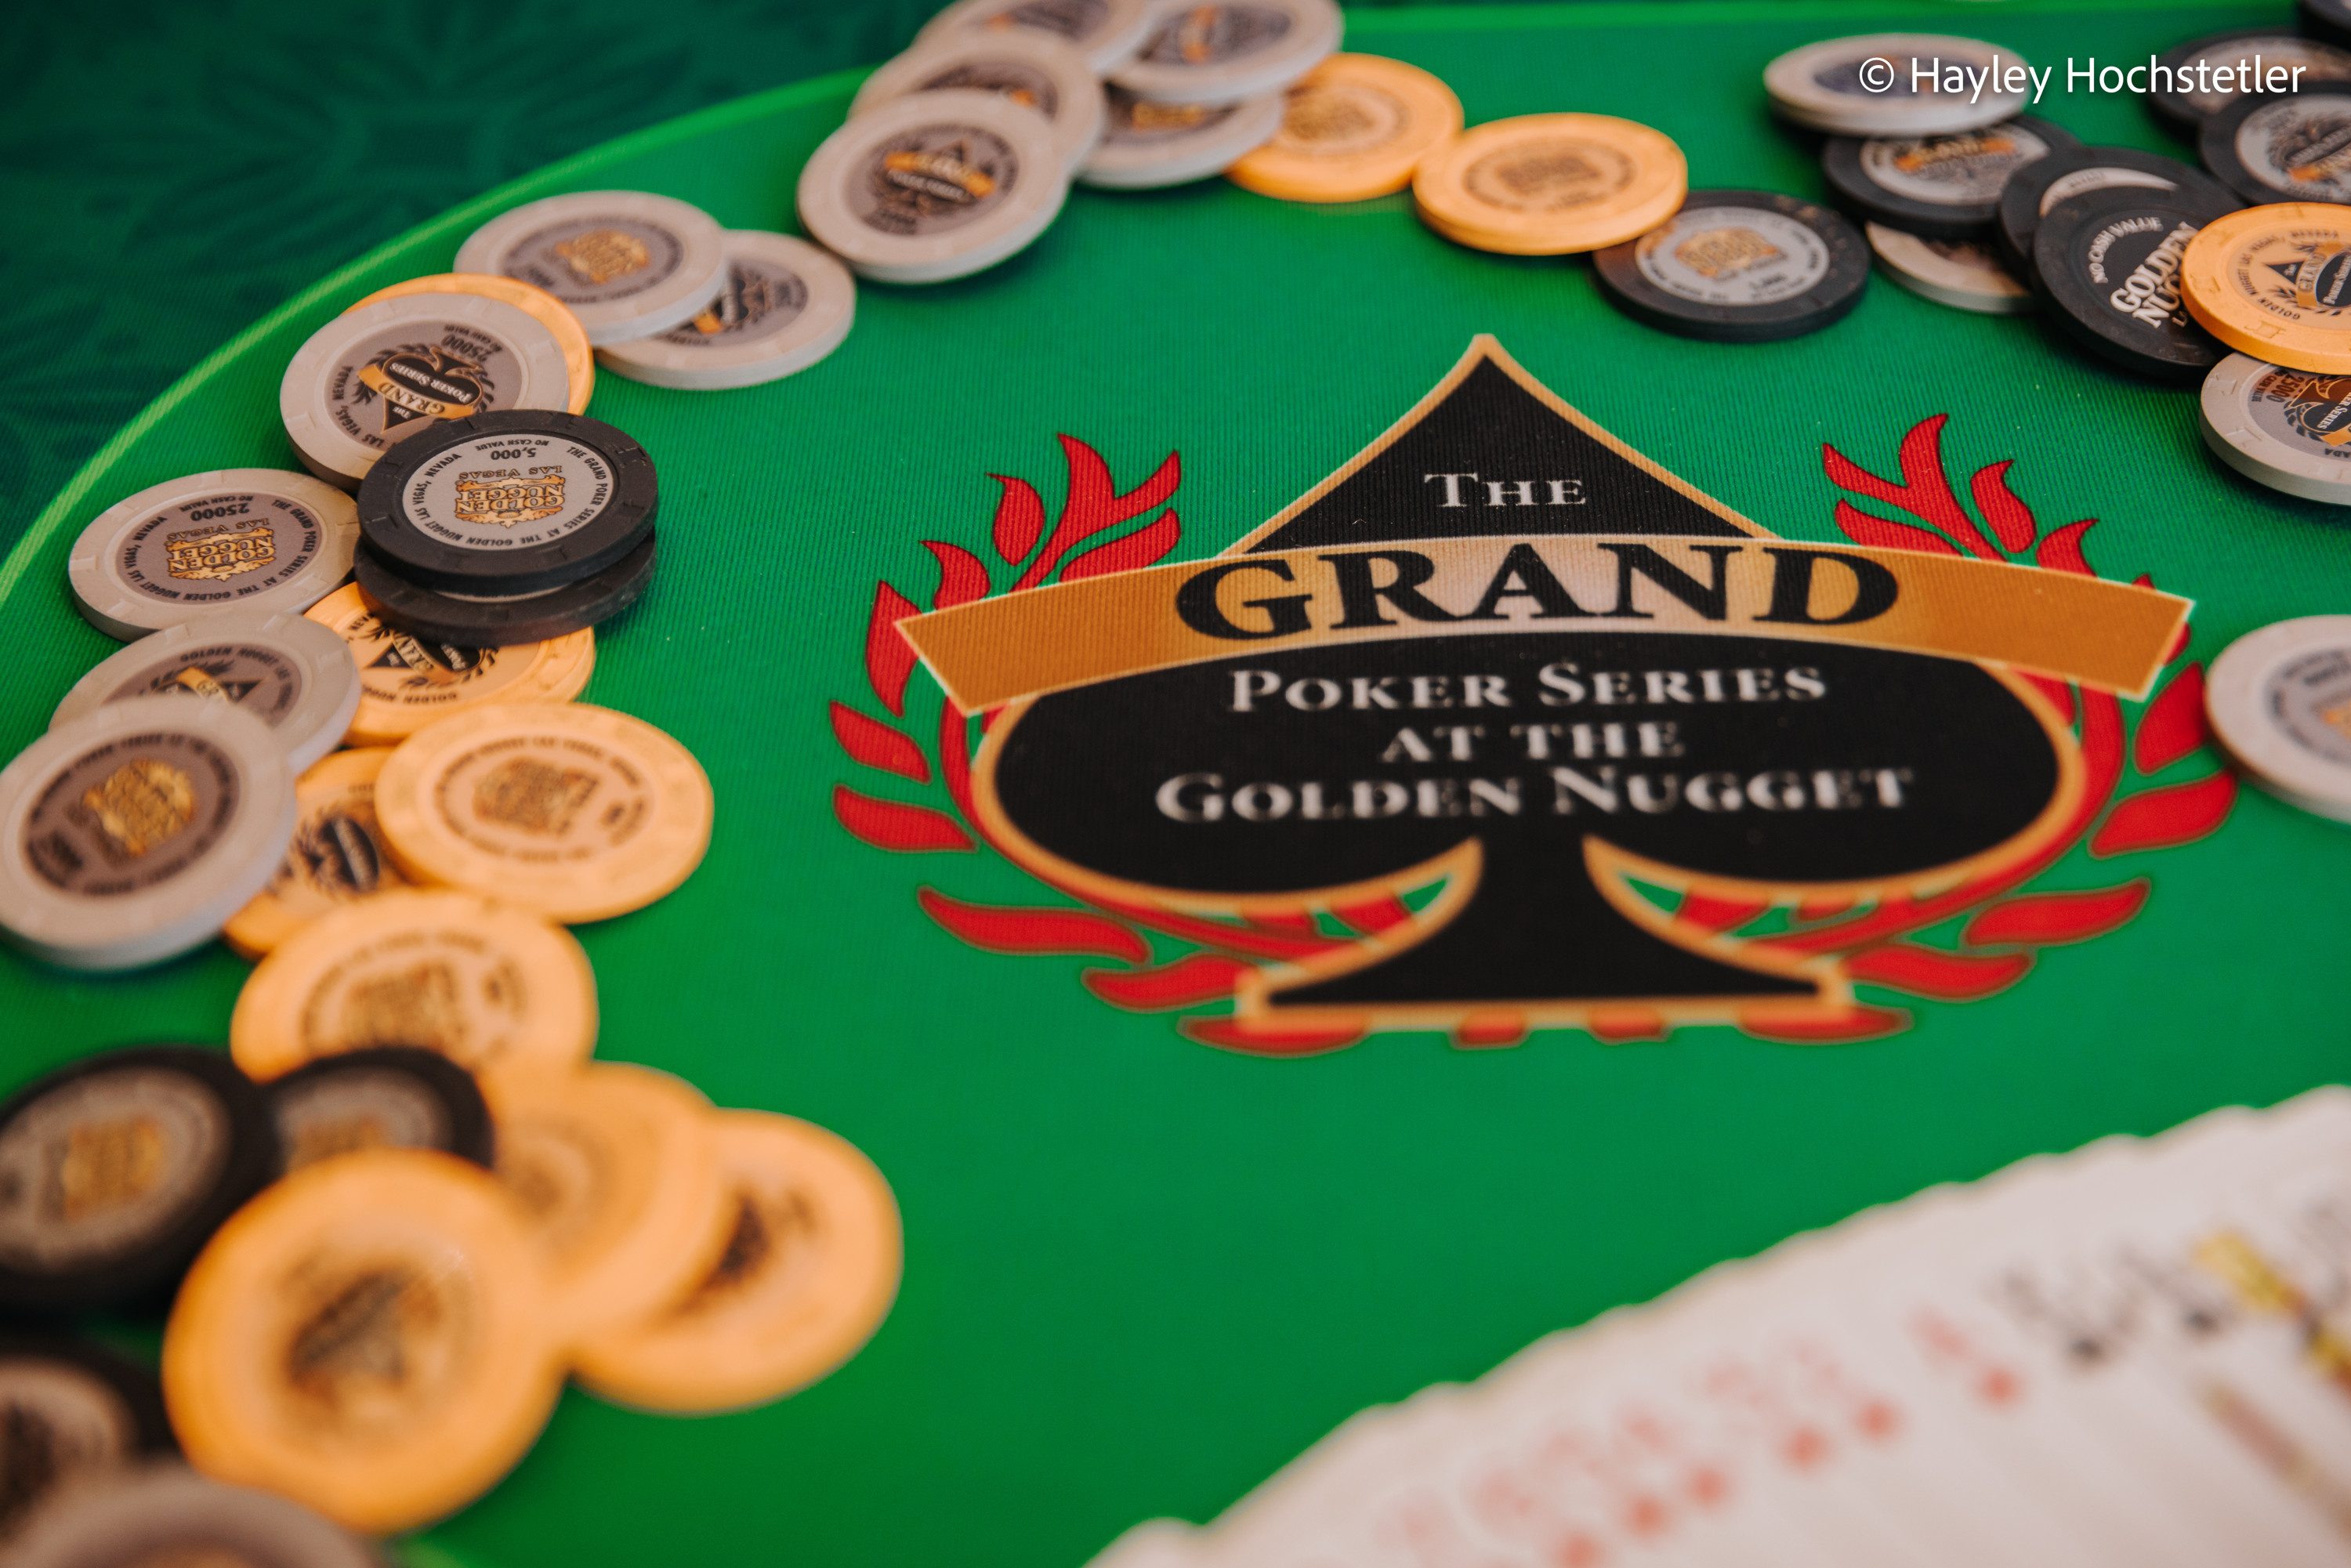 Golden Nugget Awards 4.5 Million in Prize Money During 2022 Grand